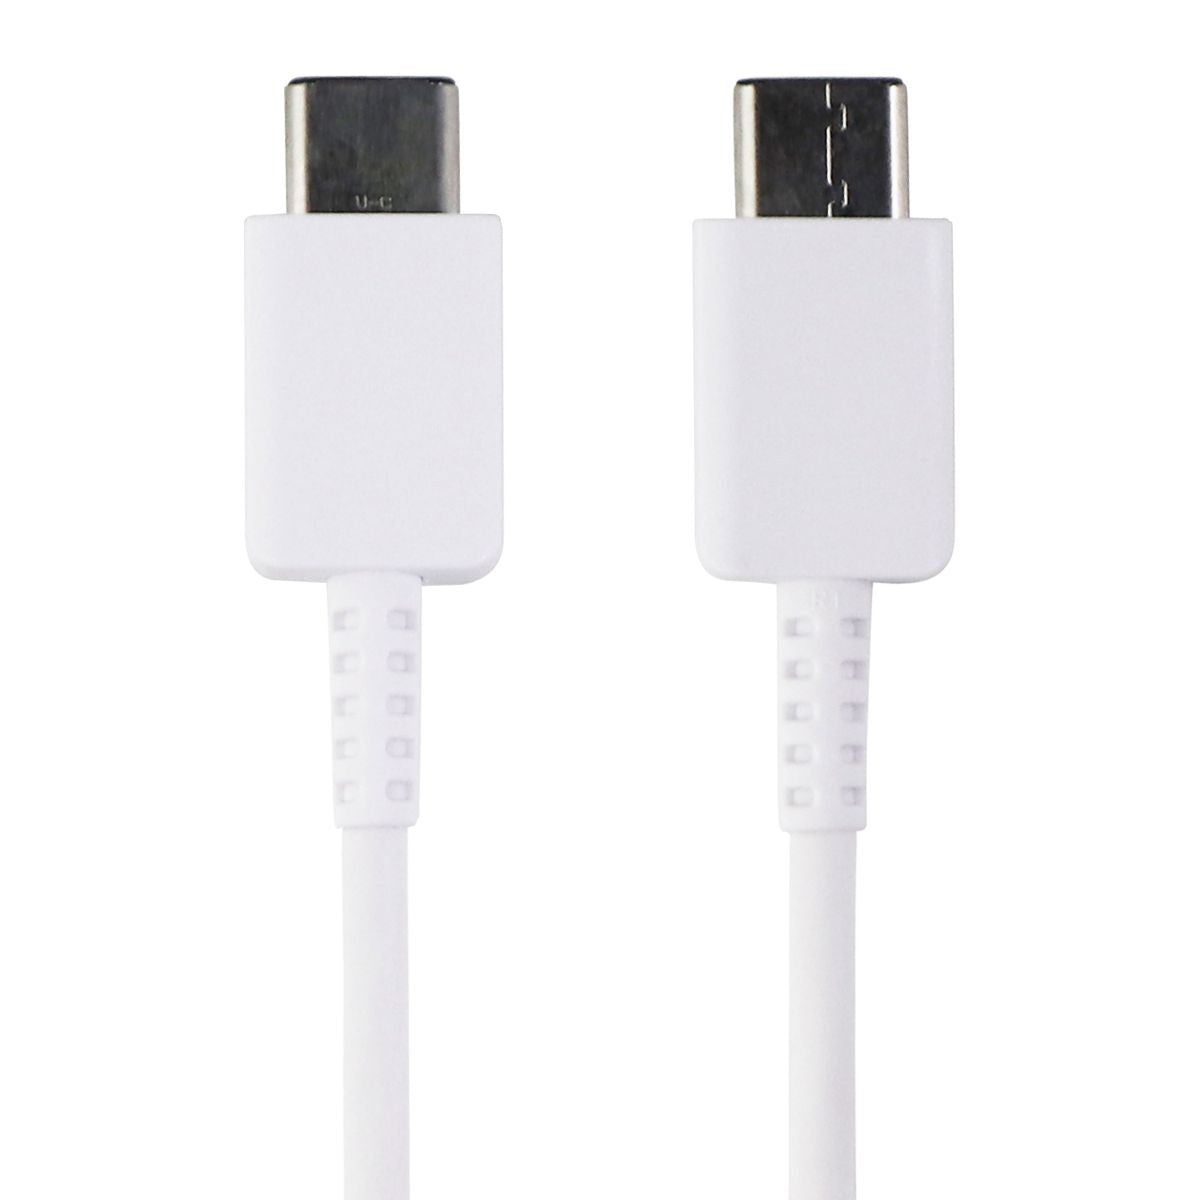 Samsung 3.3-Ft USB-C to USB-C Charge/Sync Cable - White (EP-DA705BWEGUS) Retail Cell Phone - Cables & Adapters Samsung    - Simple Cell Bulk Wholesale Pricing - USA Seller